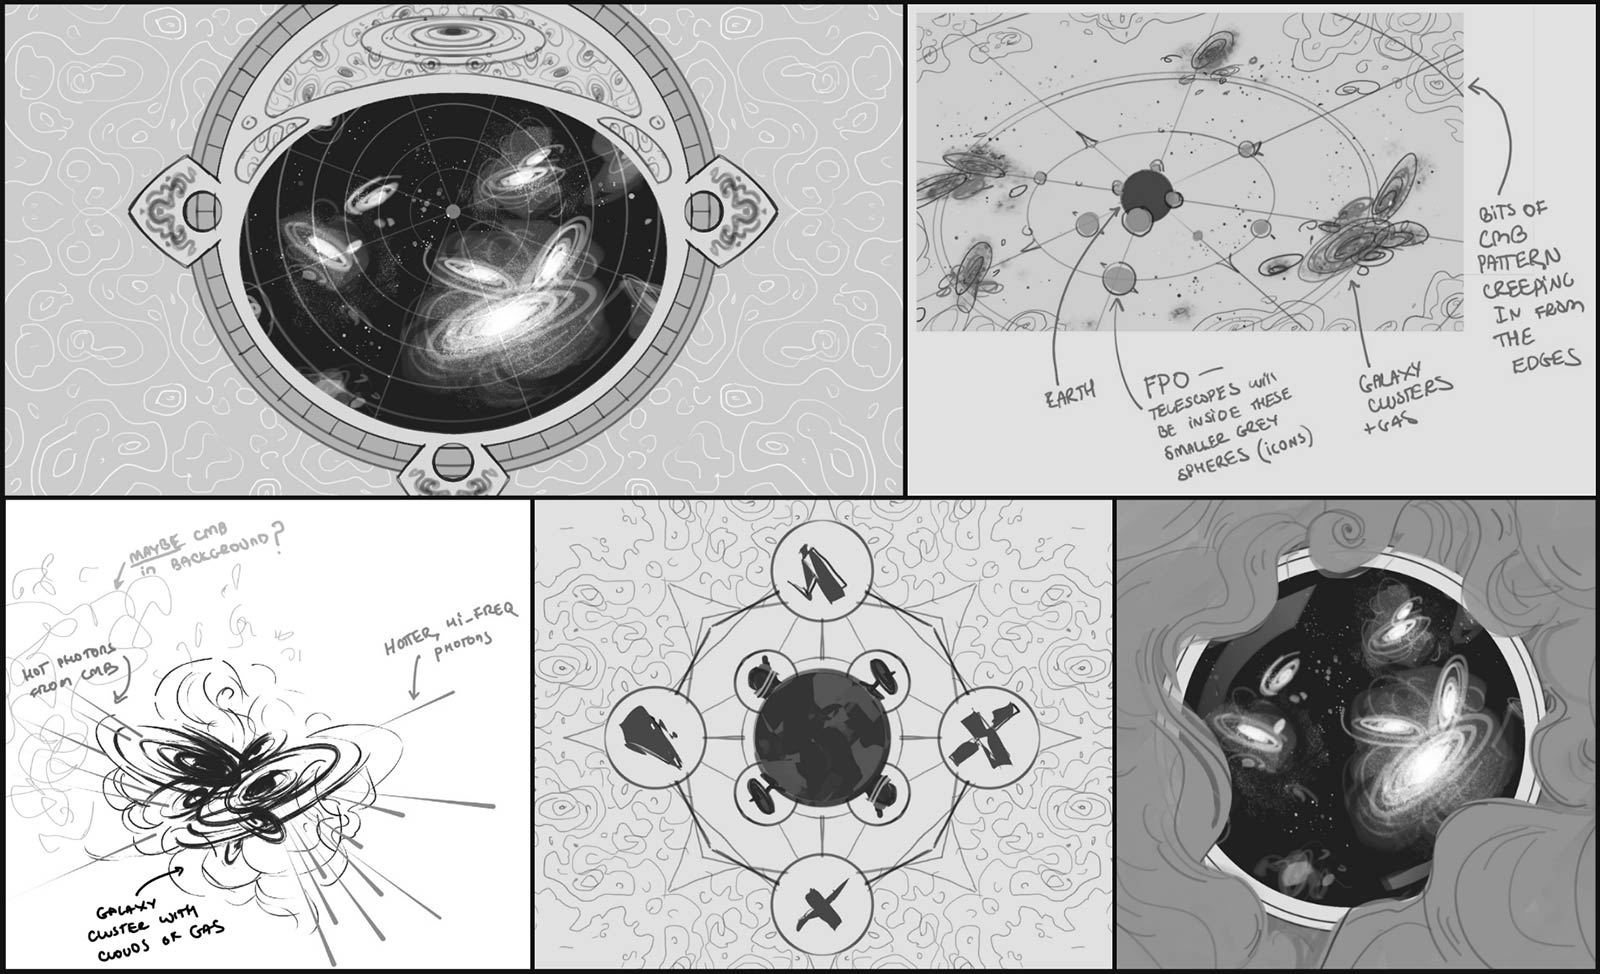 Sisible Matter: concept sketches. Variations on galaxy clusters in space incorporating antiquity-inspired designs.